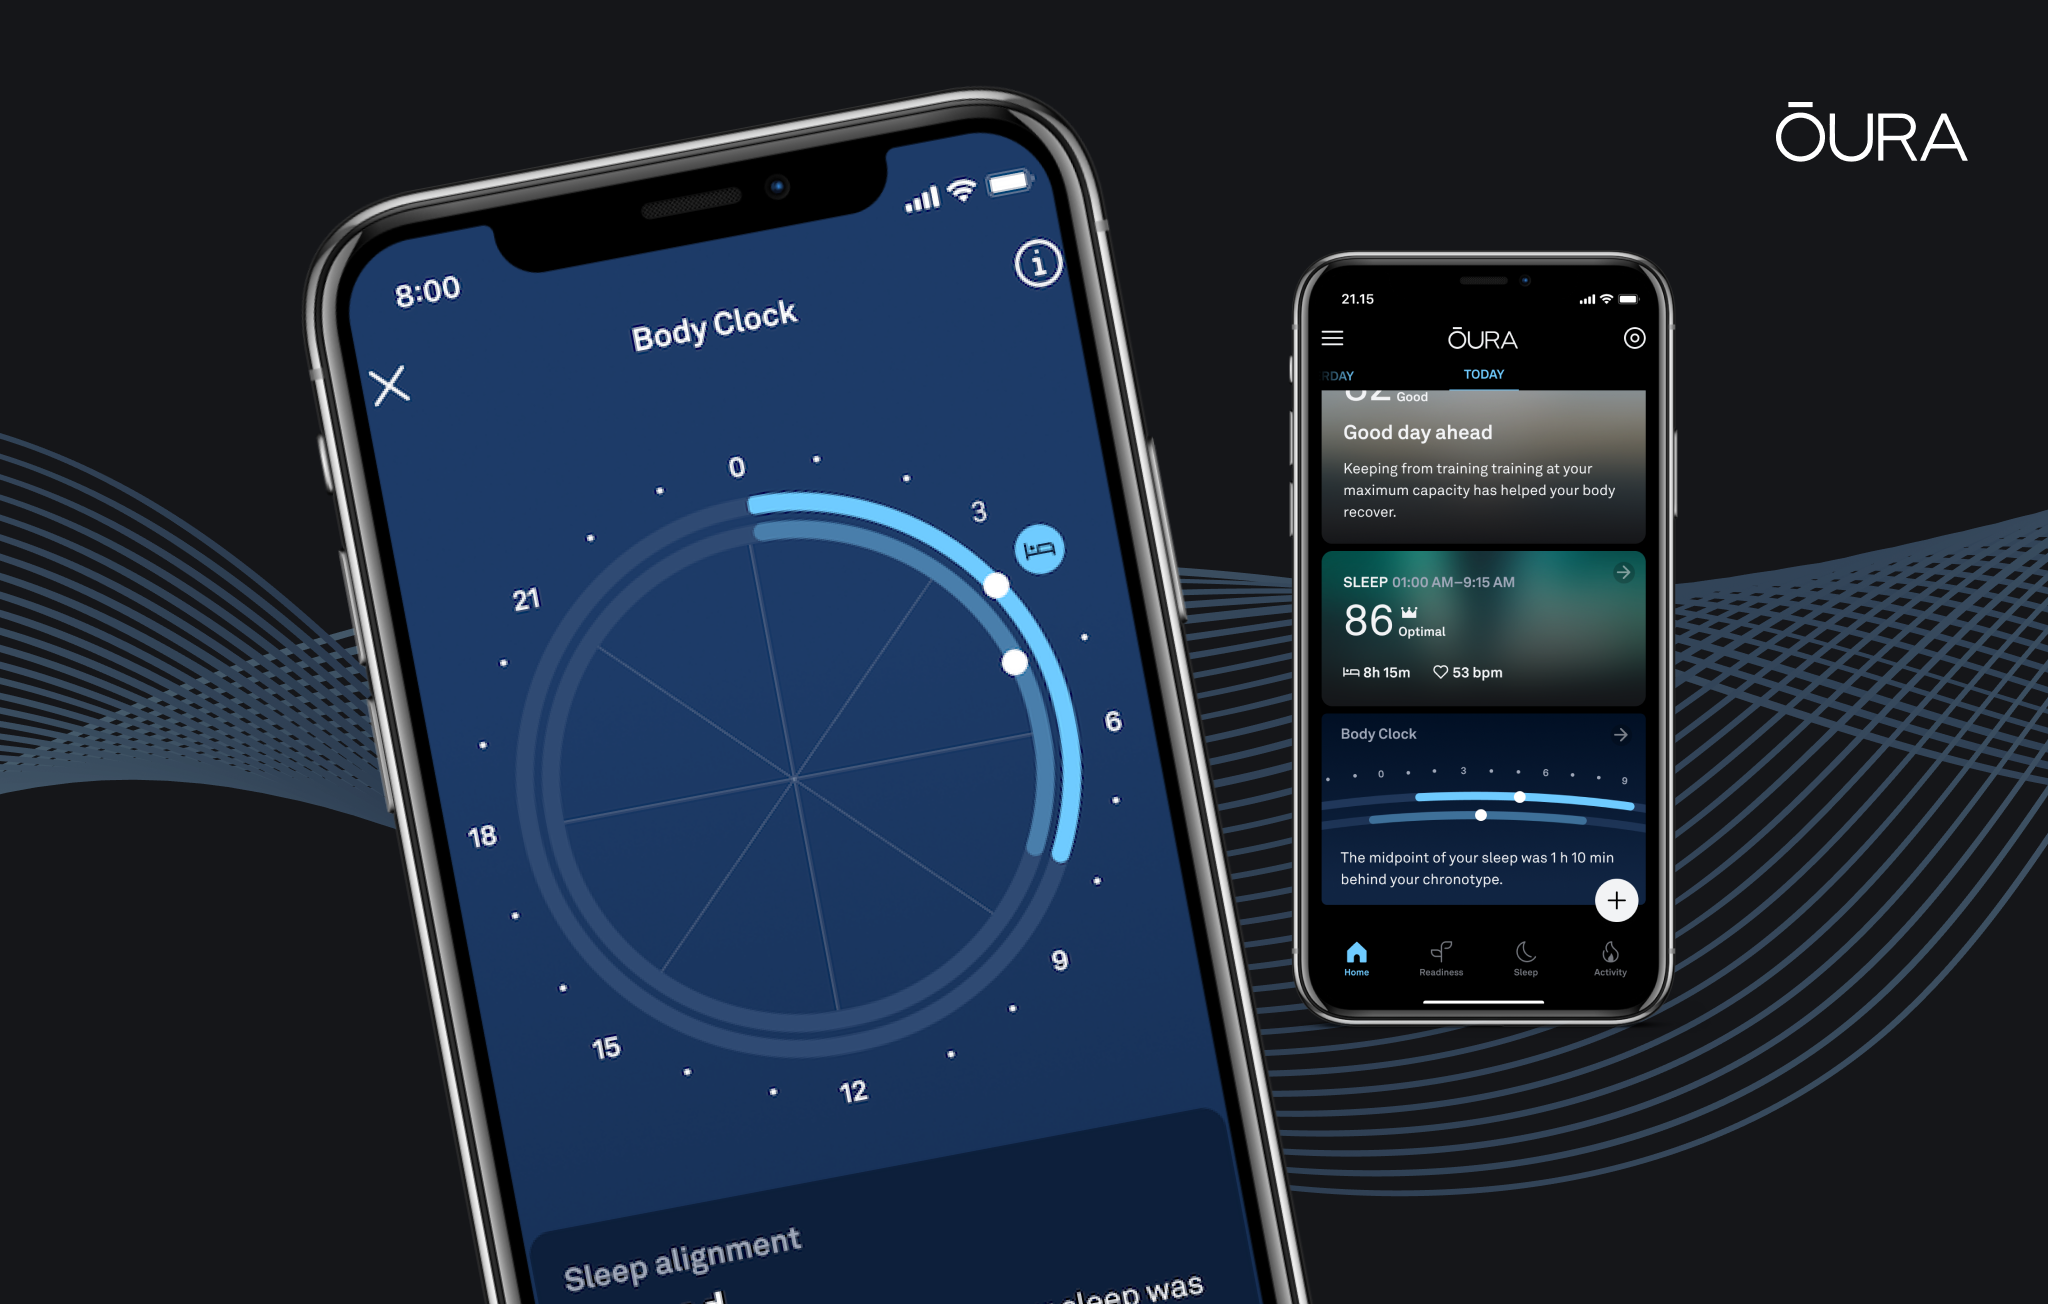 Oura App Body Clock feature